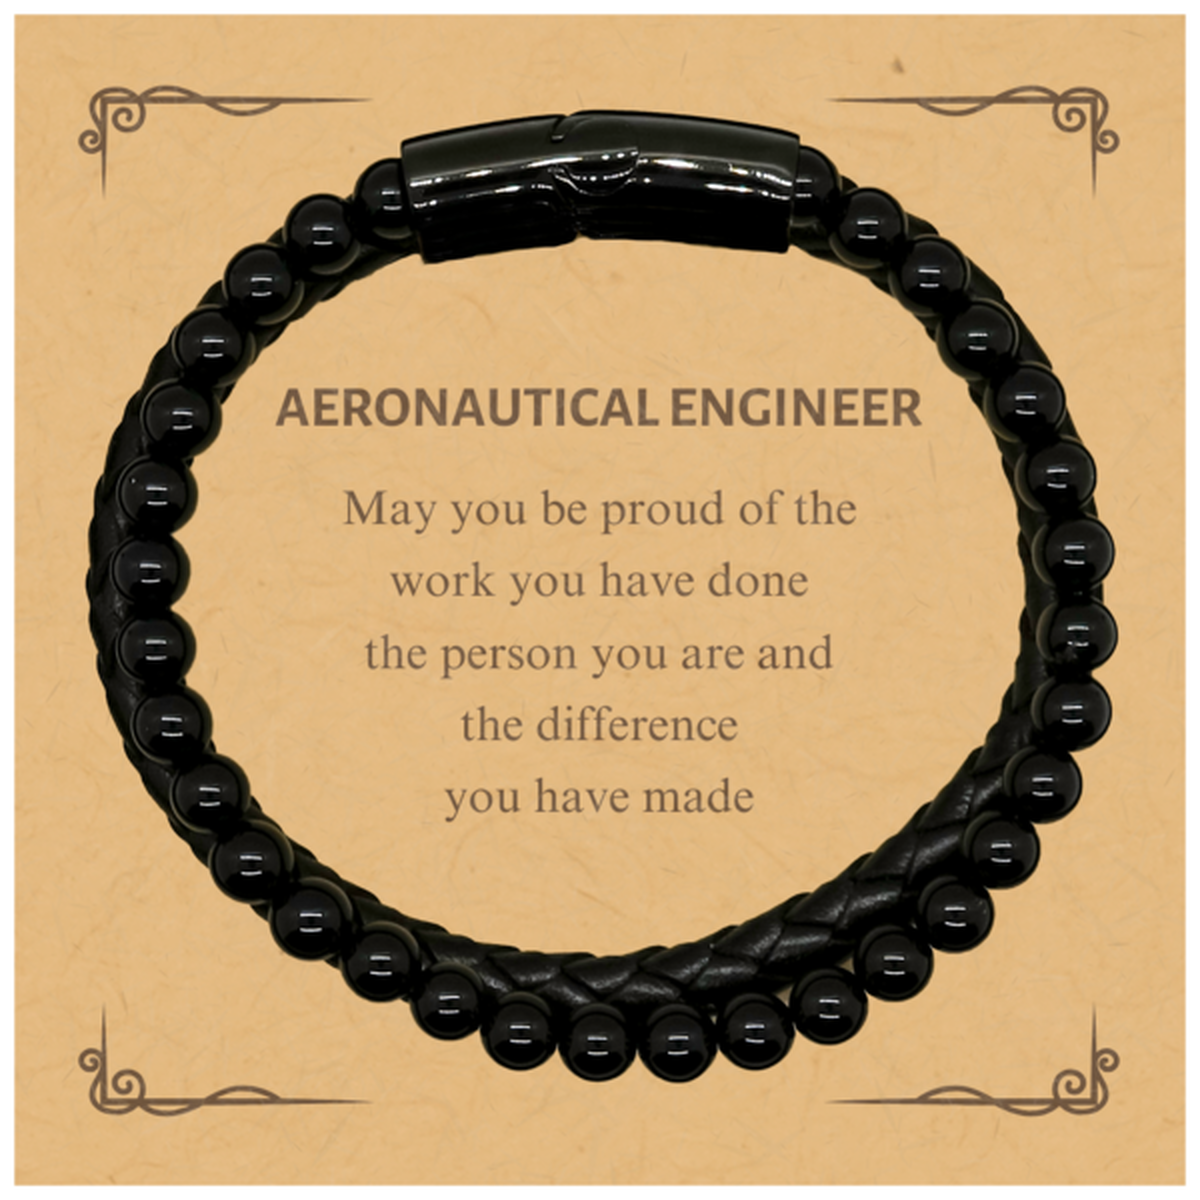 Aeronautical Engineer May you be proud of the work you have done, Retirement Aeronautical Engineer Stone Leather Bracelets for Colleague Appreciation Gifts Amazing for Aeronautical Engineer